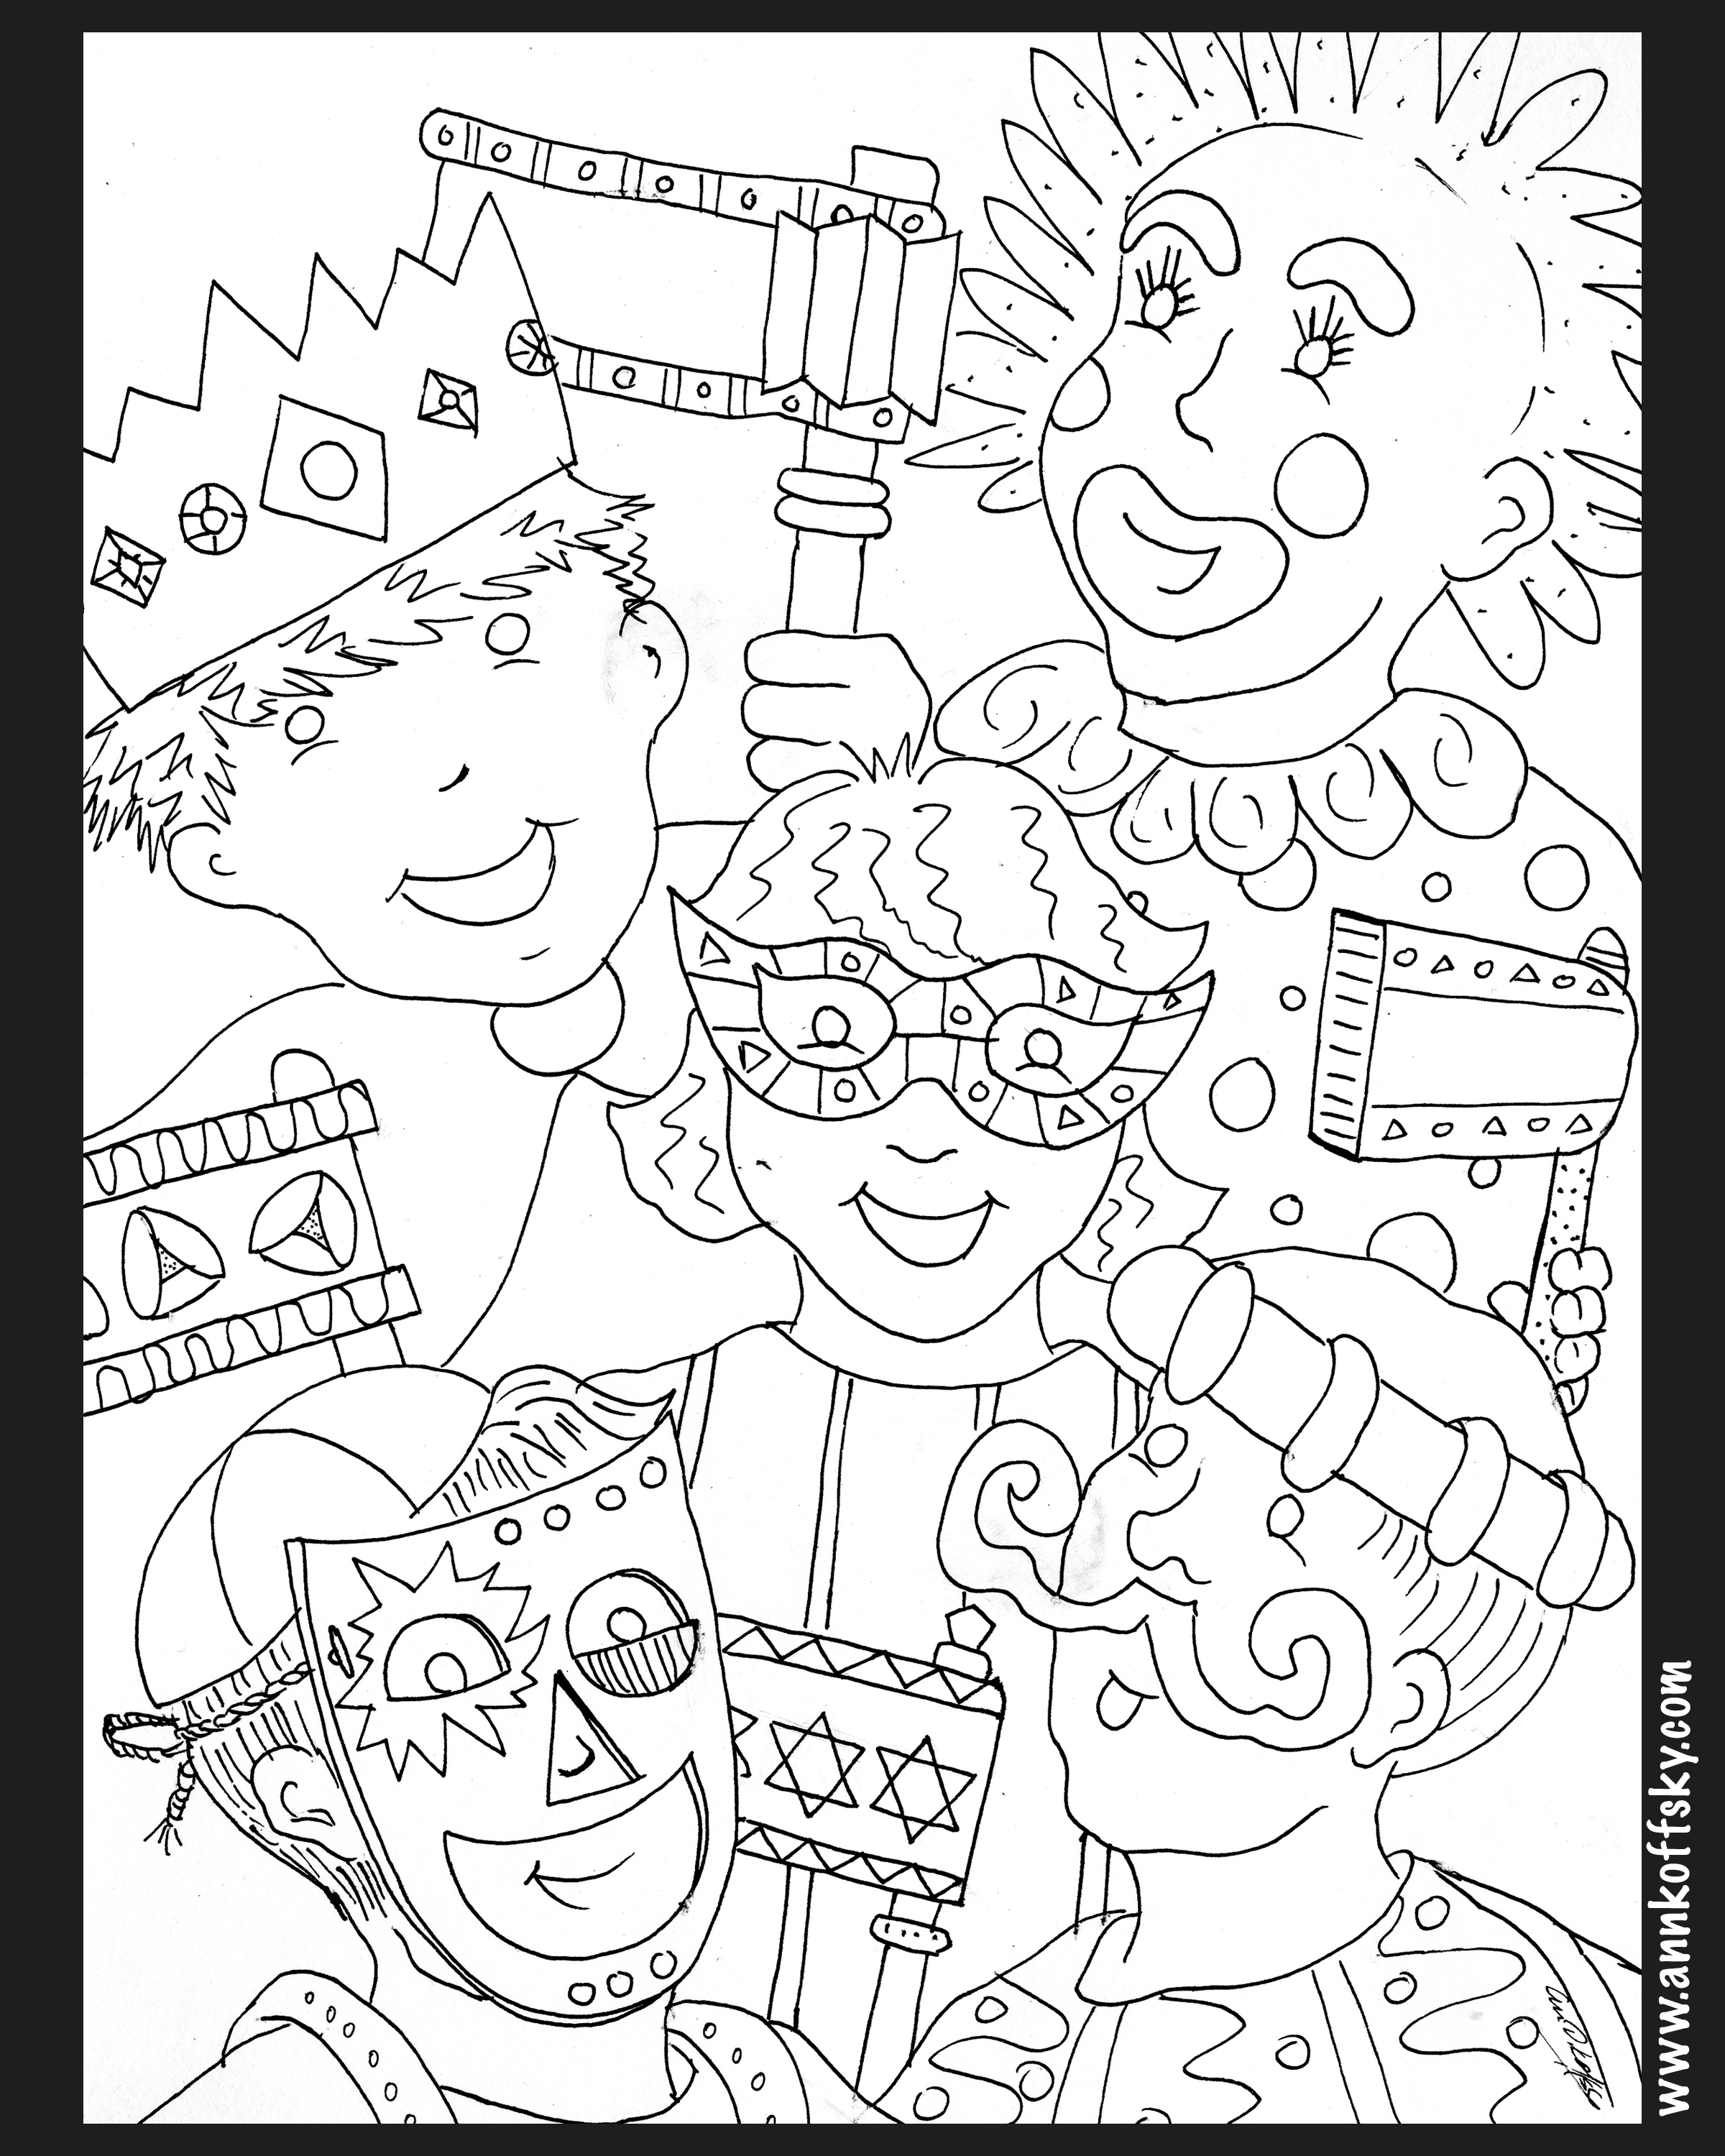 Purim Coloring Page – Ann D. Koffsky